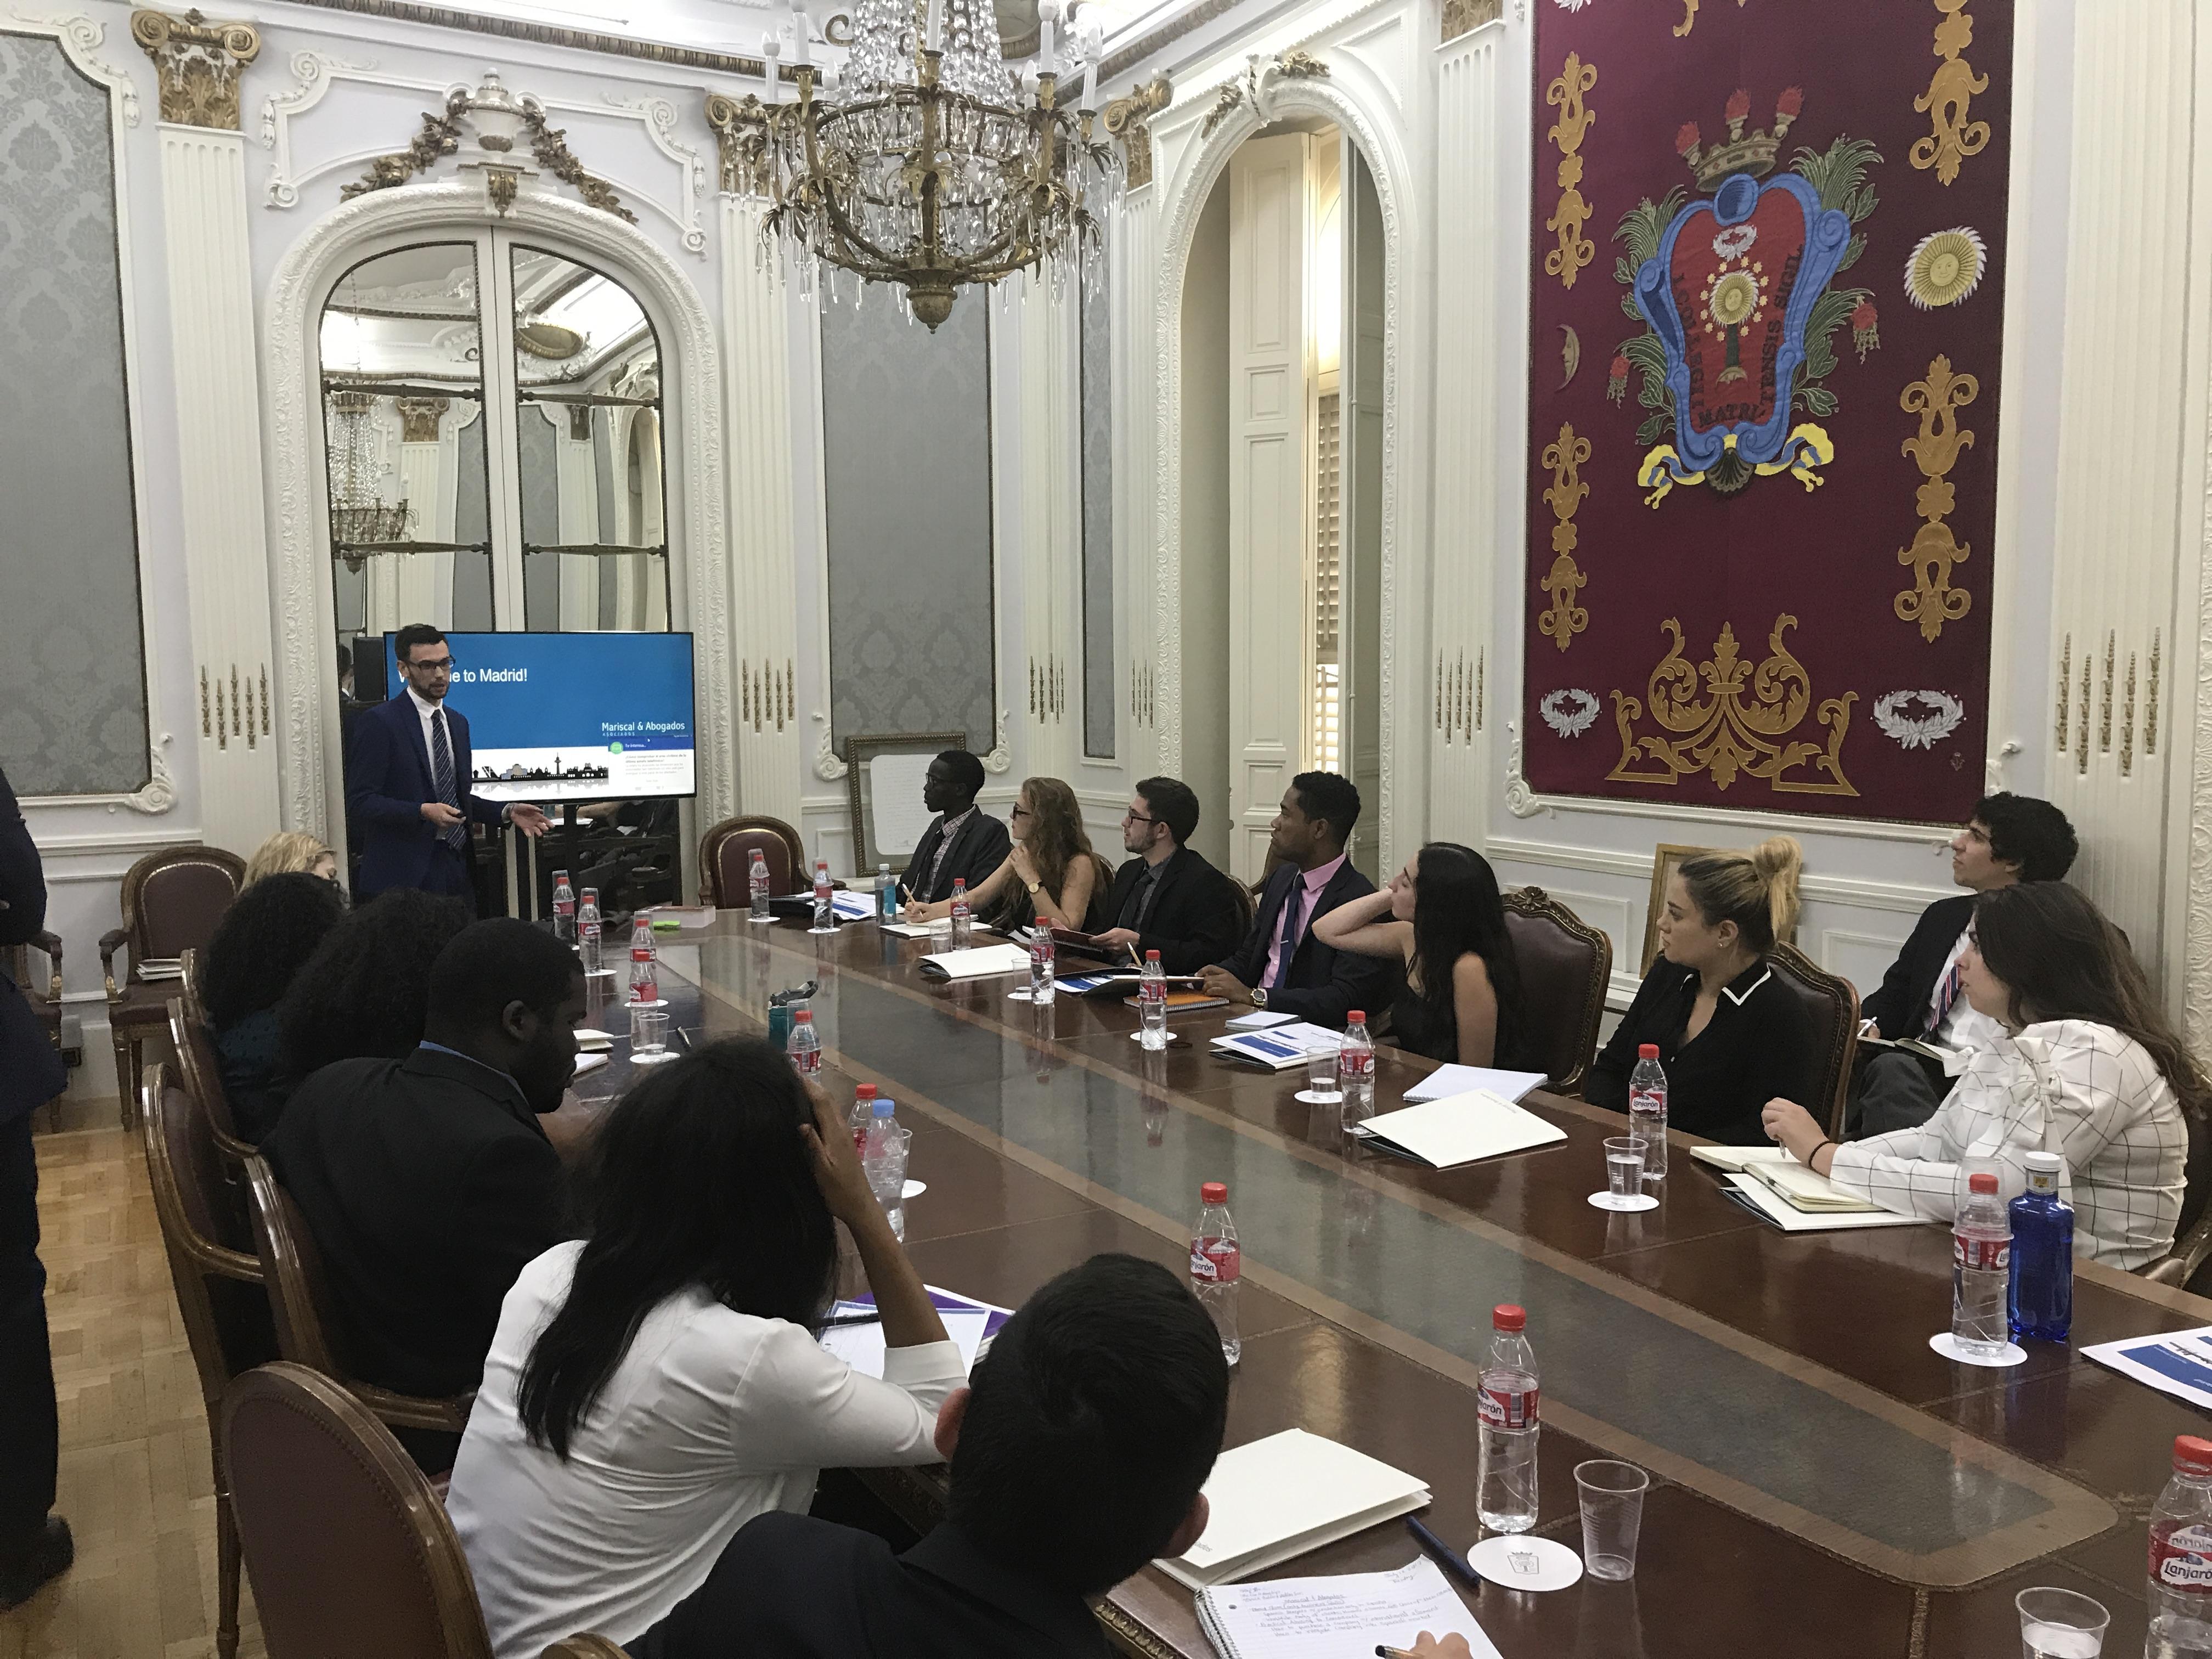 Mariscal & Abogados offers a talk to american law students